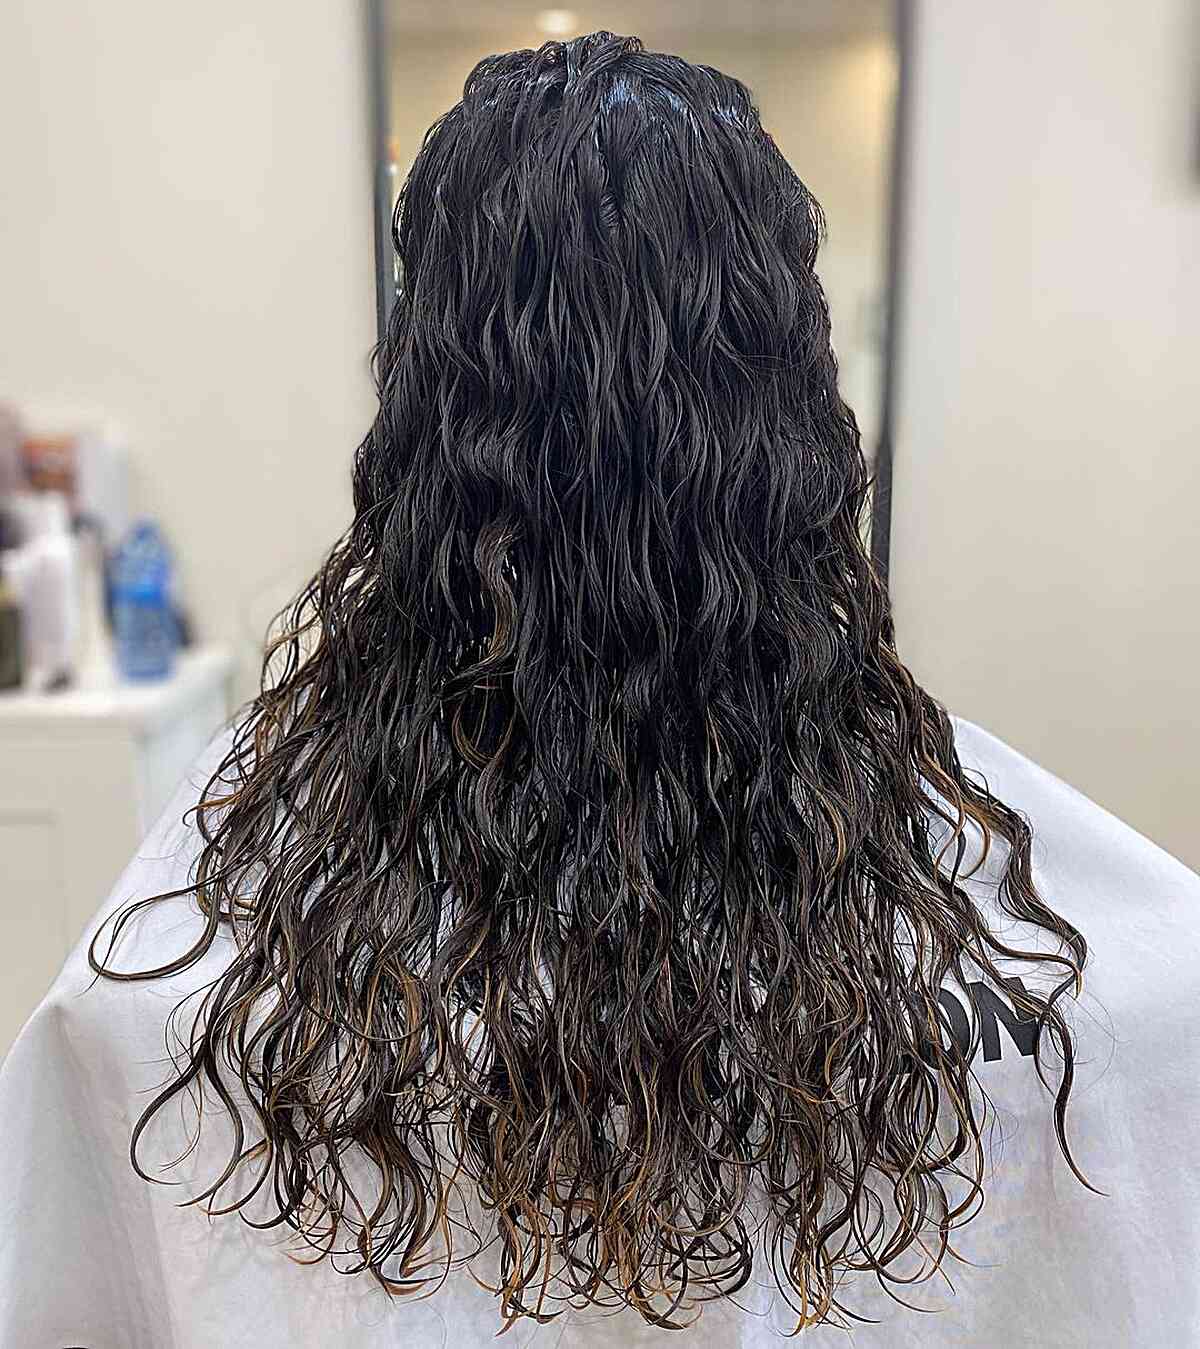 Long Dark Hair with Spiral Body Wave Perm